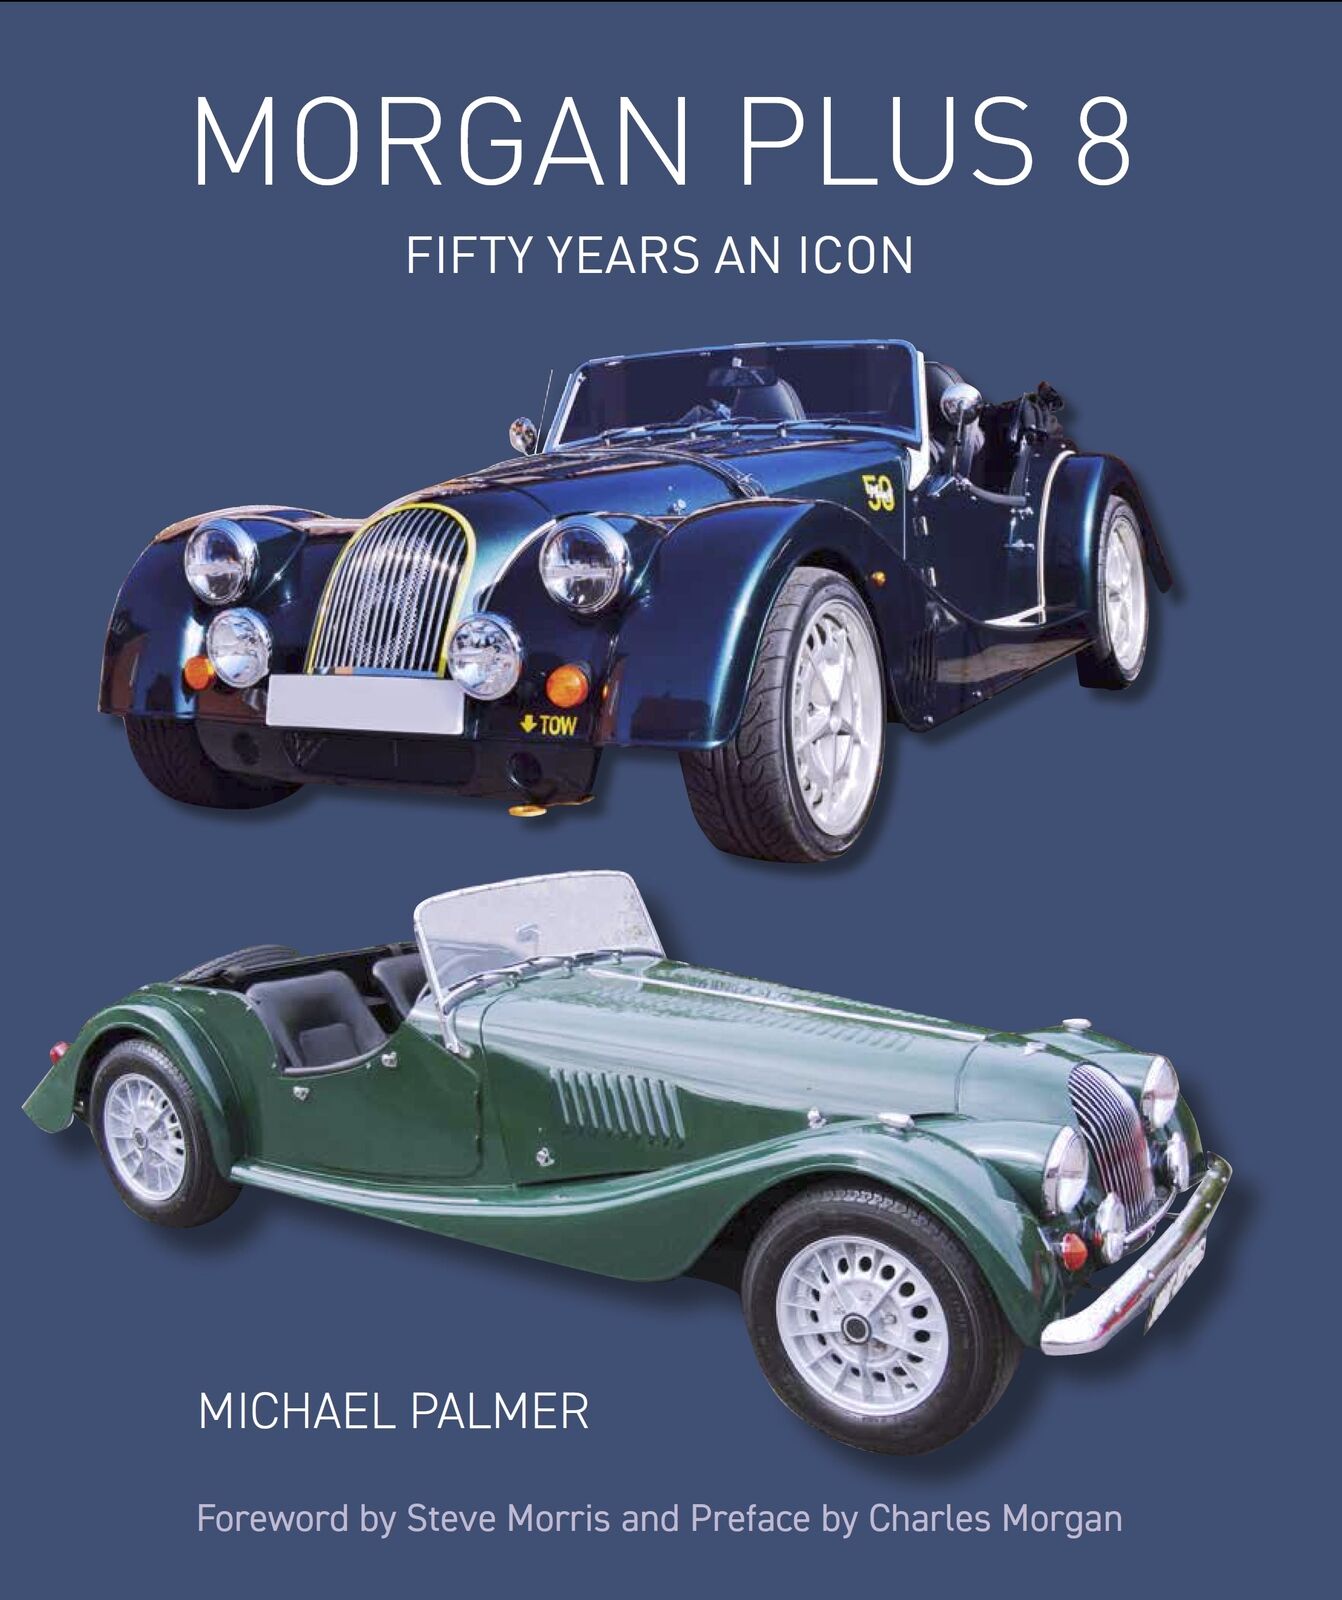 Morgan Plus 8 Fifty Years an Icon book specifications factory photos